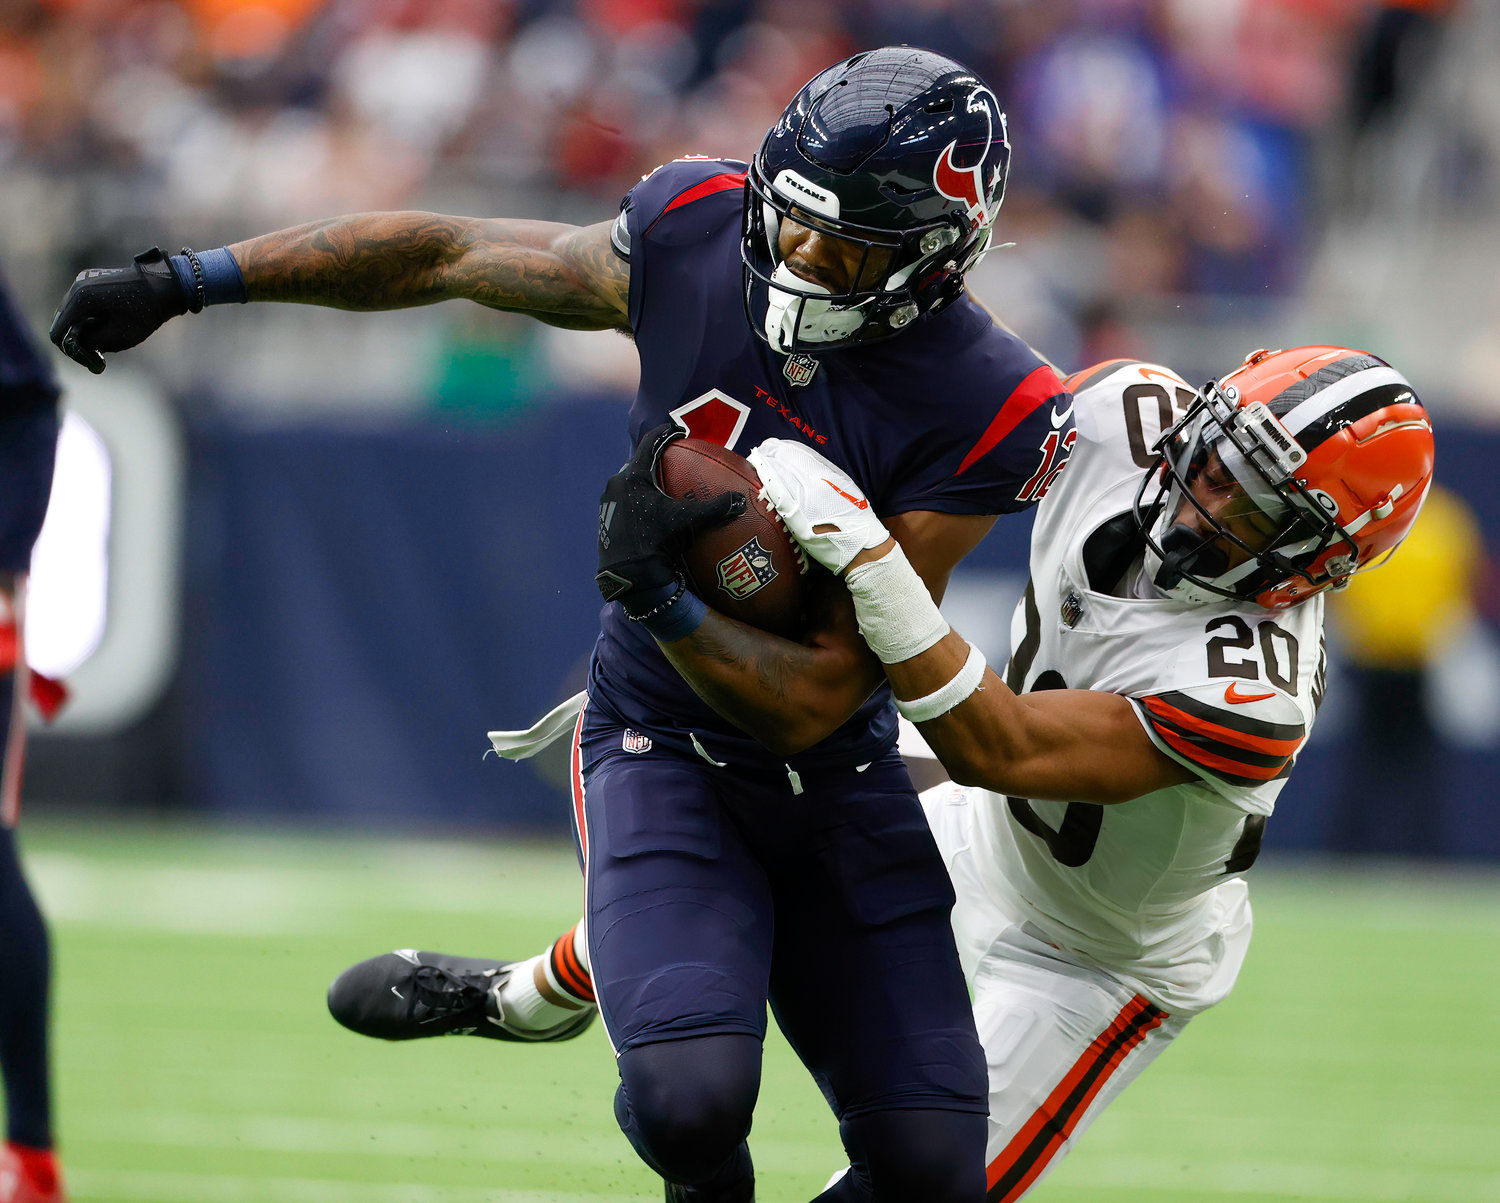 Cleveland Browns cornerback Greg Newsome II (20) works to bring down Houston Texans wide receiver Nico Collins (12) after a catch during an NFL game between the Houston Texans and the Cleveland Browns on Dec. 4, 2022, in Houston. The Browns won, 27-14.